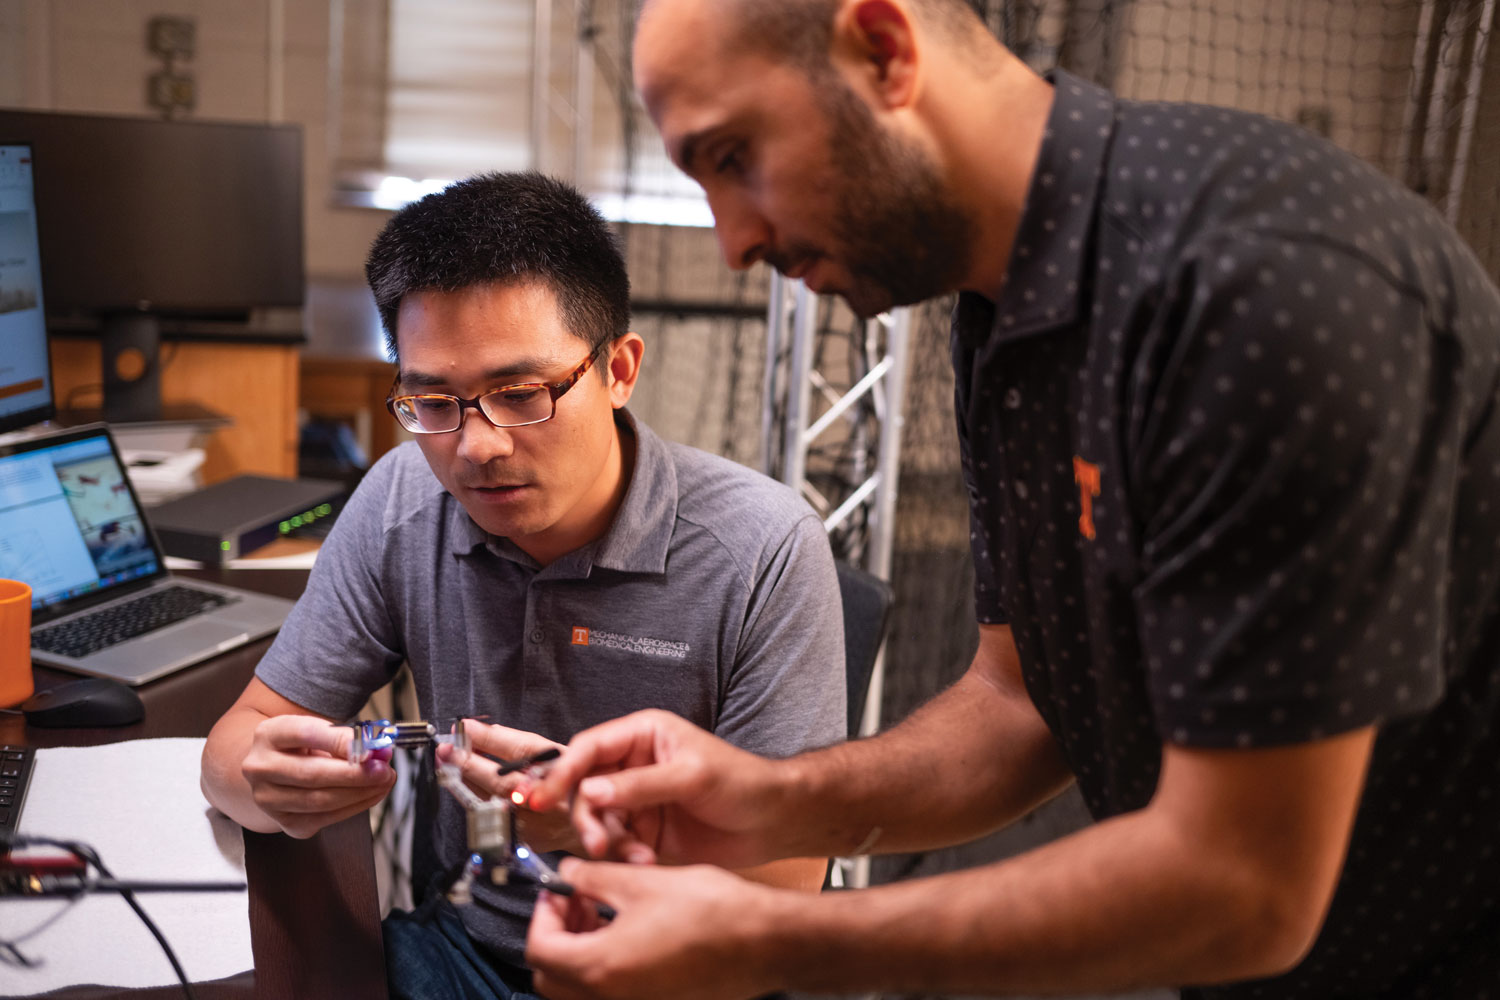 Zhenbo Wang and grad student work on assembling drone.